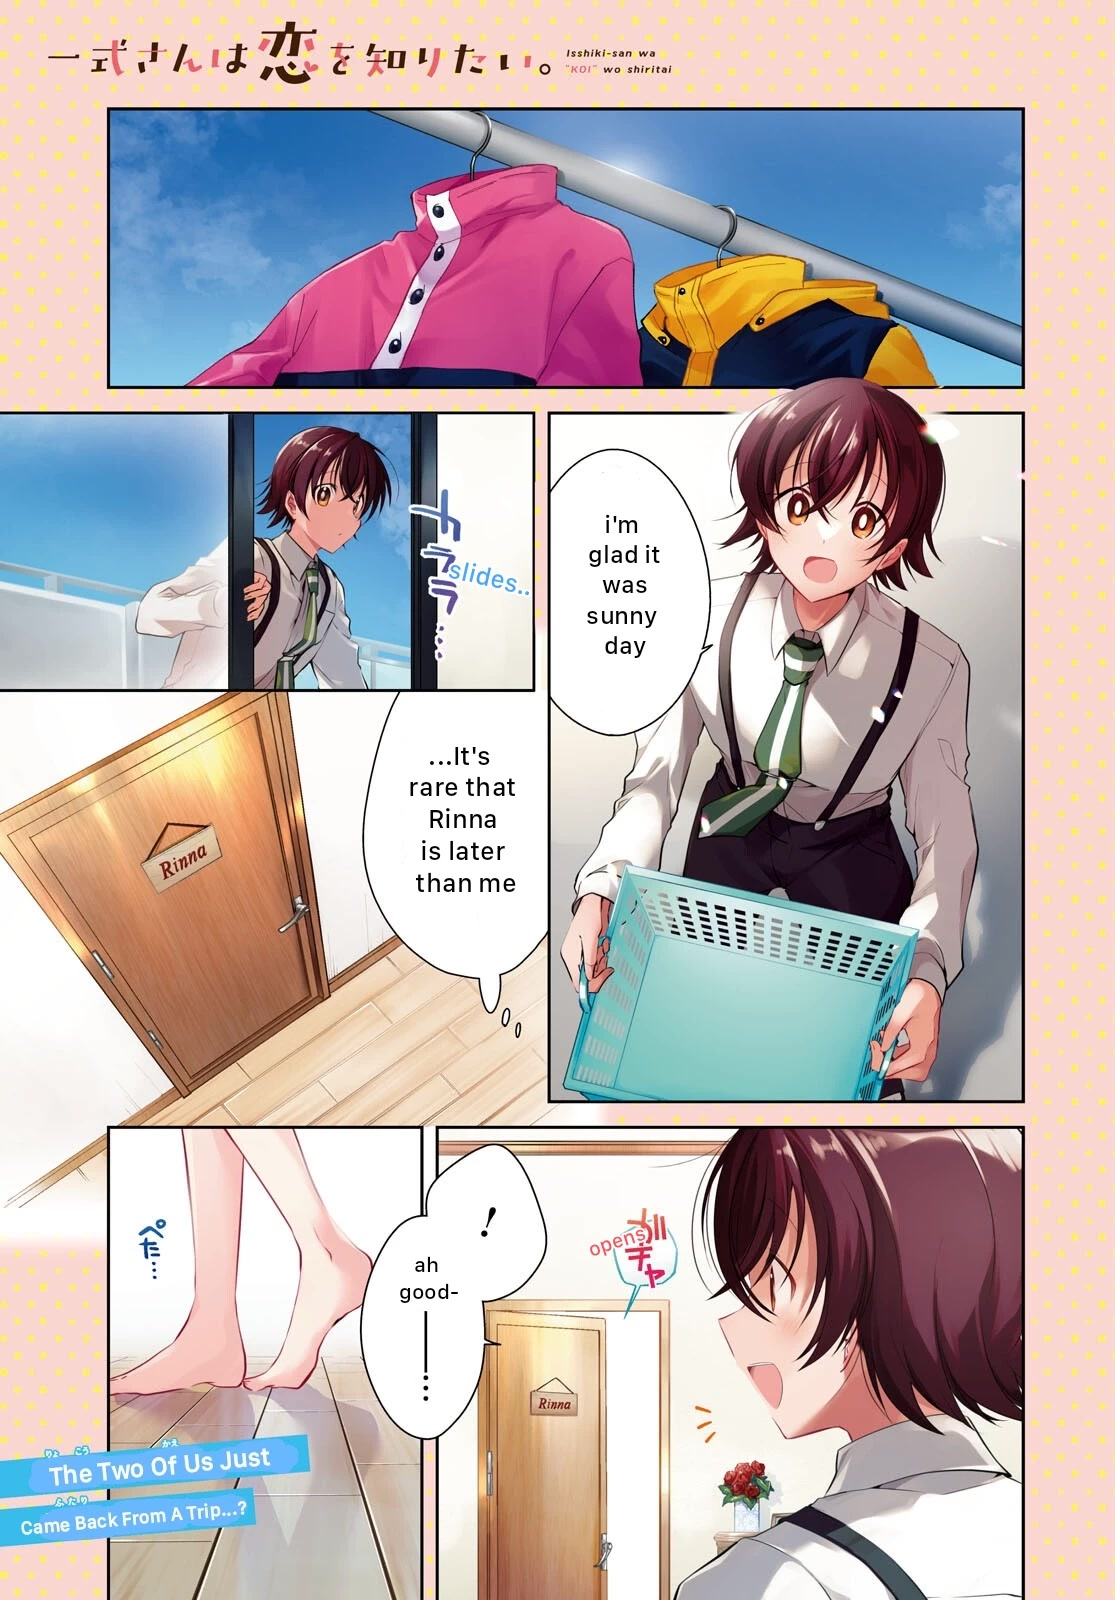 Isshiki-san Wants to Know About Love. - chapter 21 - #1